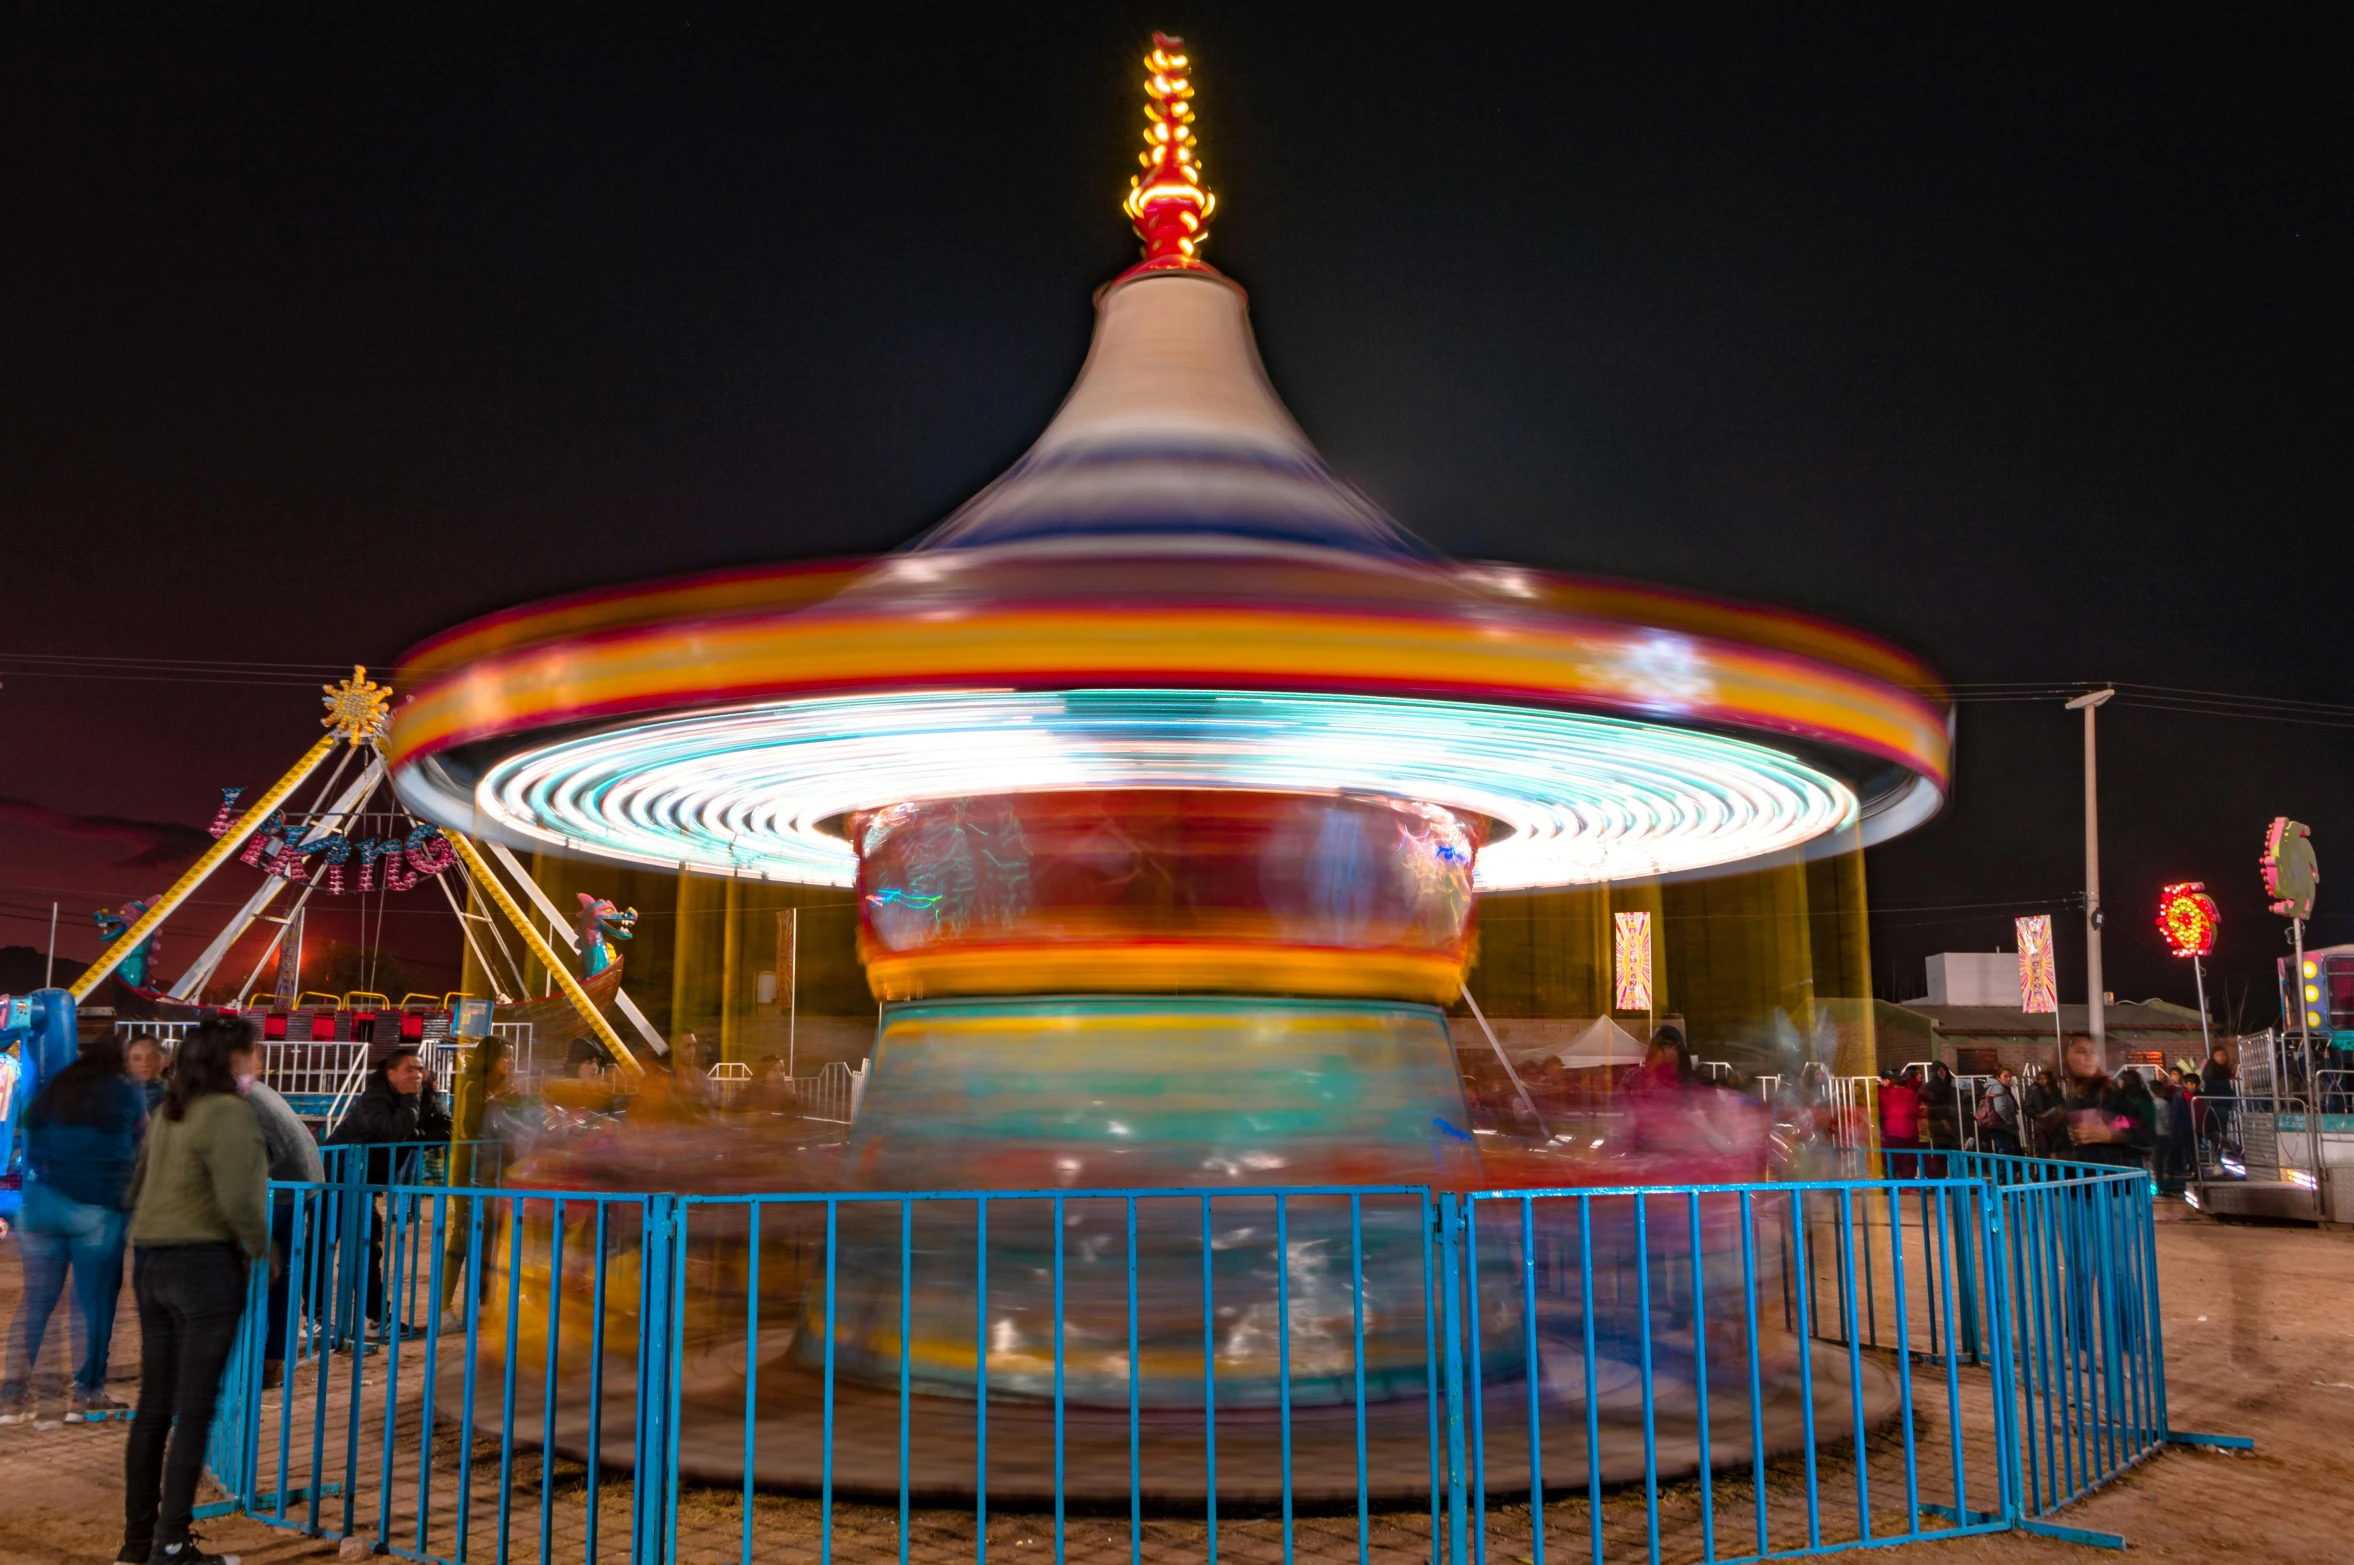 the fairground at night with a carousel at the end